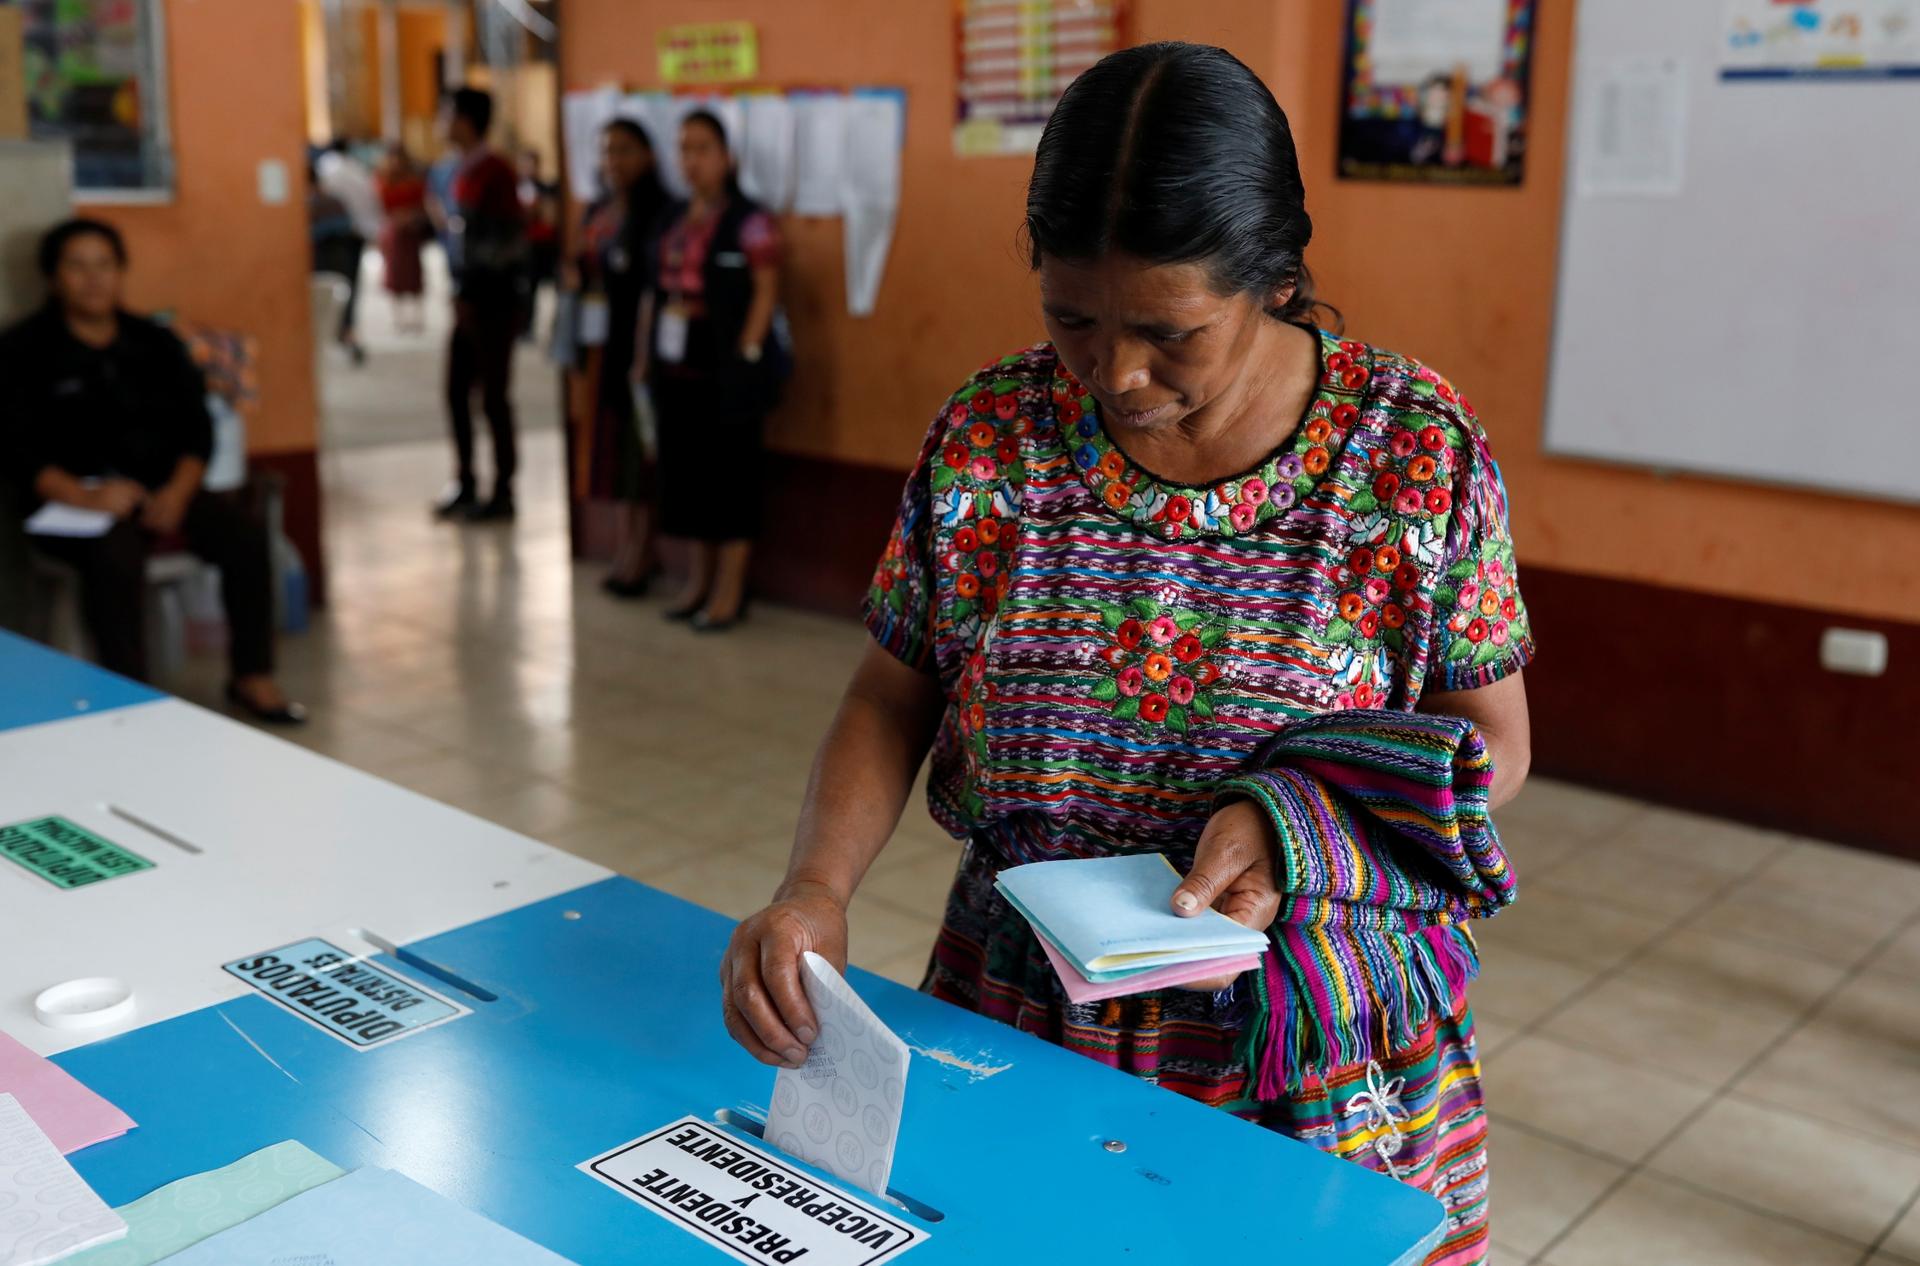 A woman votes at a polling station during the first round of Guatemala's presidential election in San Pedro Sacatepequez, Guatemala, June 16, 2019. 